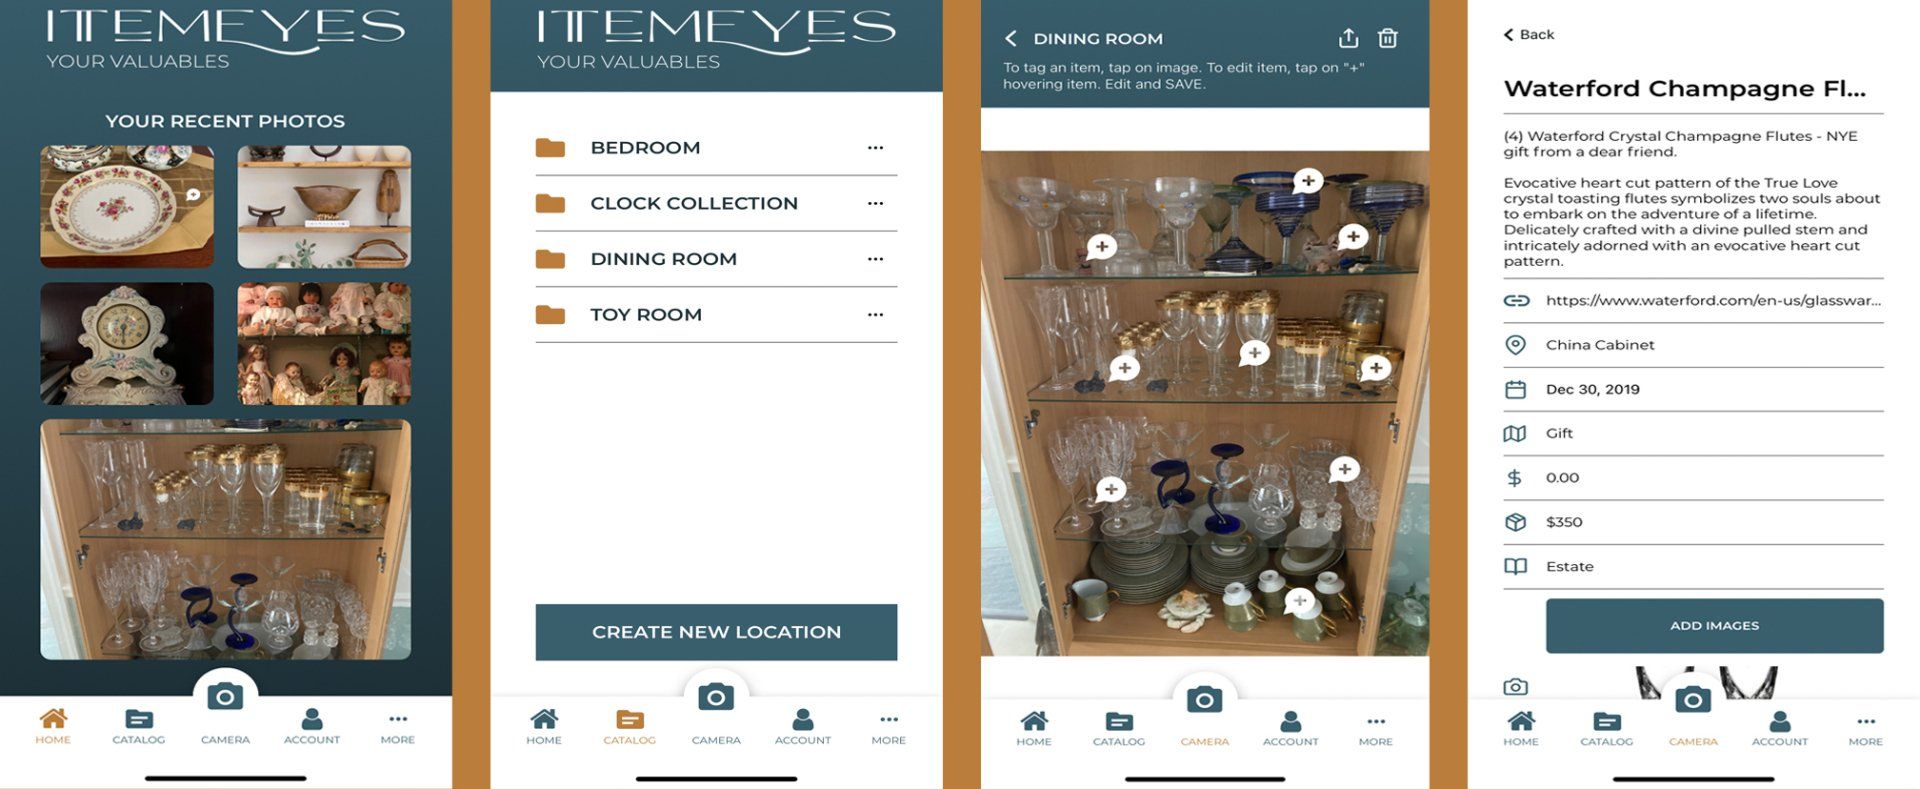 Tag your valuables with ItemEyes App - Valuables Inventory App for estate and insurance